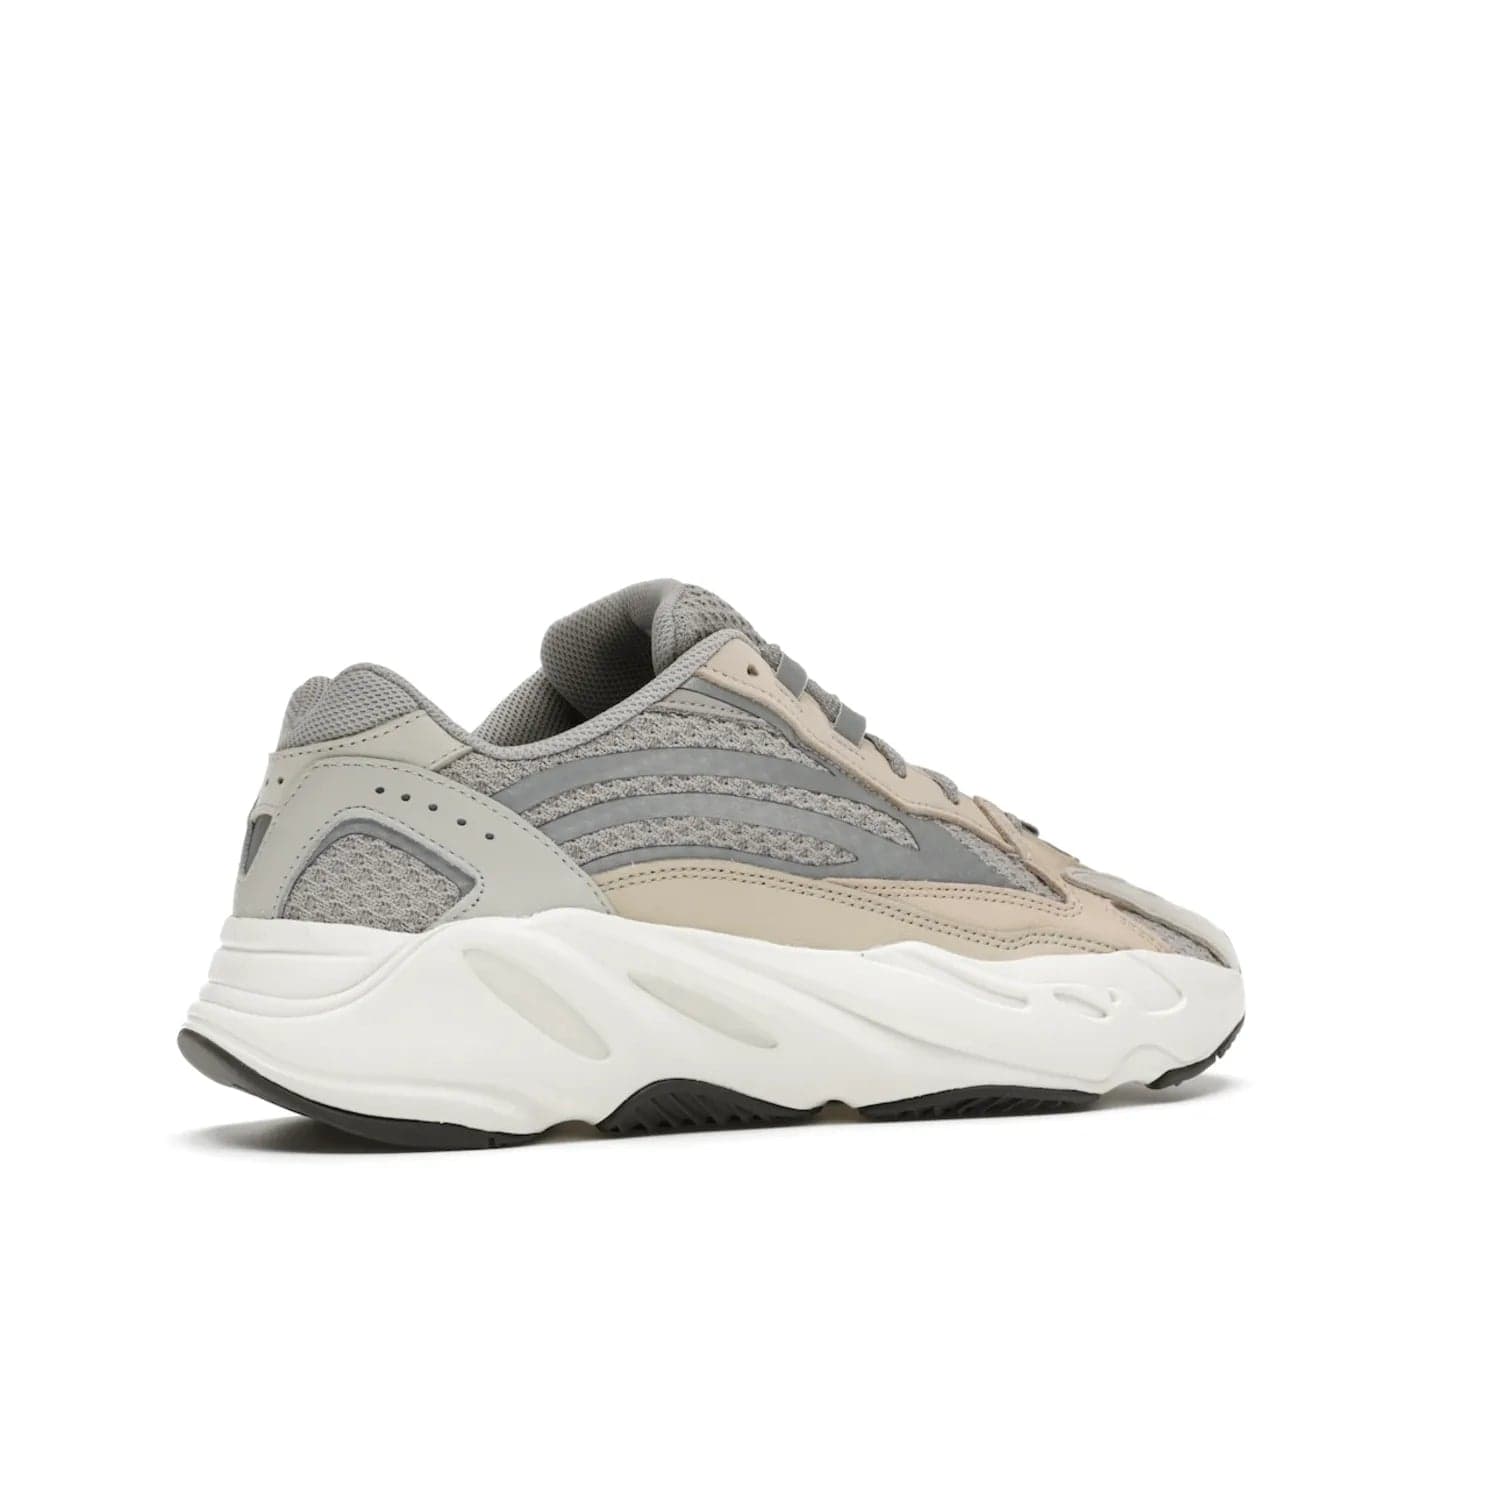 adidas Yeezy Boost 700 V2 Cream - Image 34 - Only at www.BallersClubKickz.com - Add style and luxury to your wardrobe with the adidas Yeezy 700 V2 Cream. Featuring a unique reflective upper, leather overlays, mesh underlays and the signature BOOST midsole, this silhouette is perfect for any stylish wardrobe.